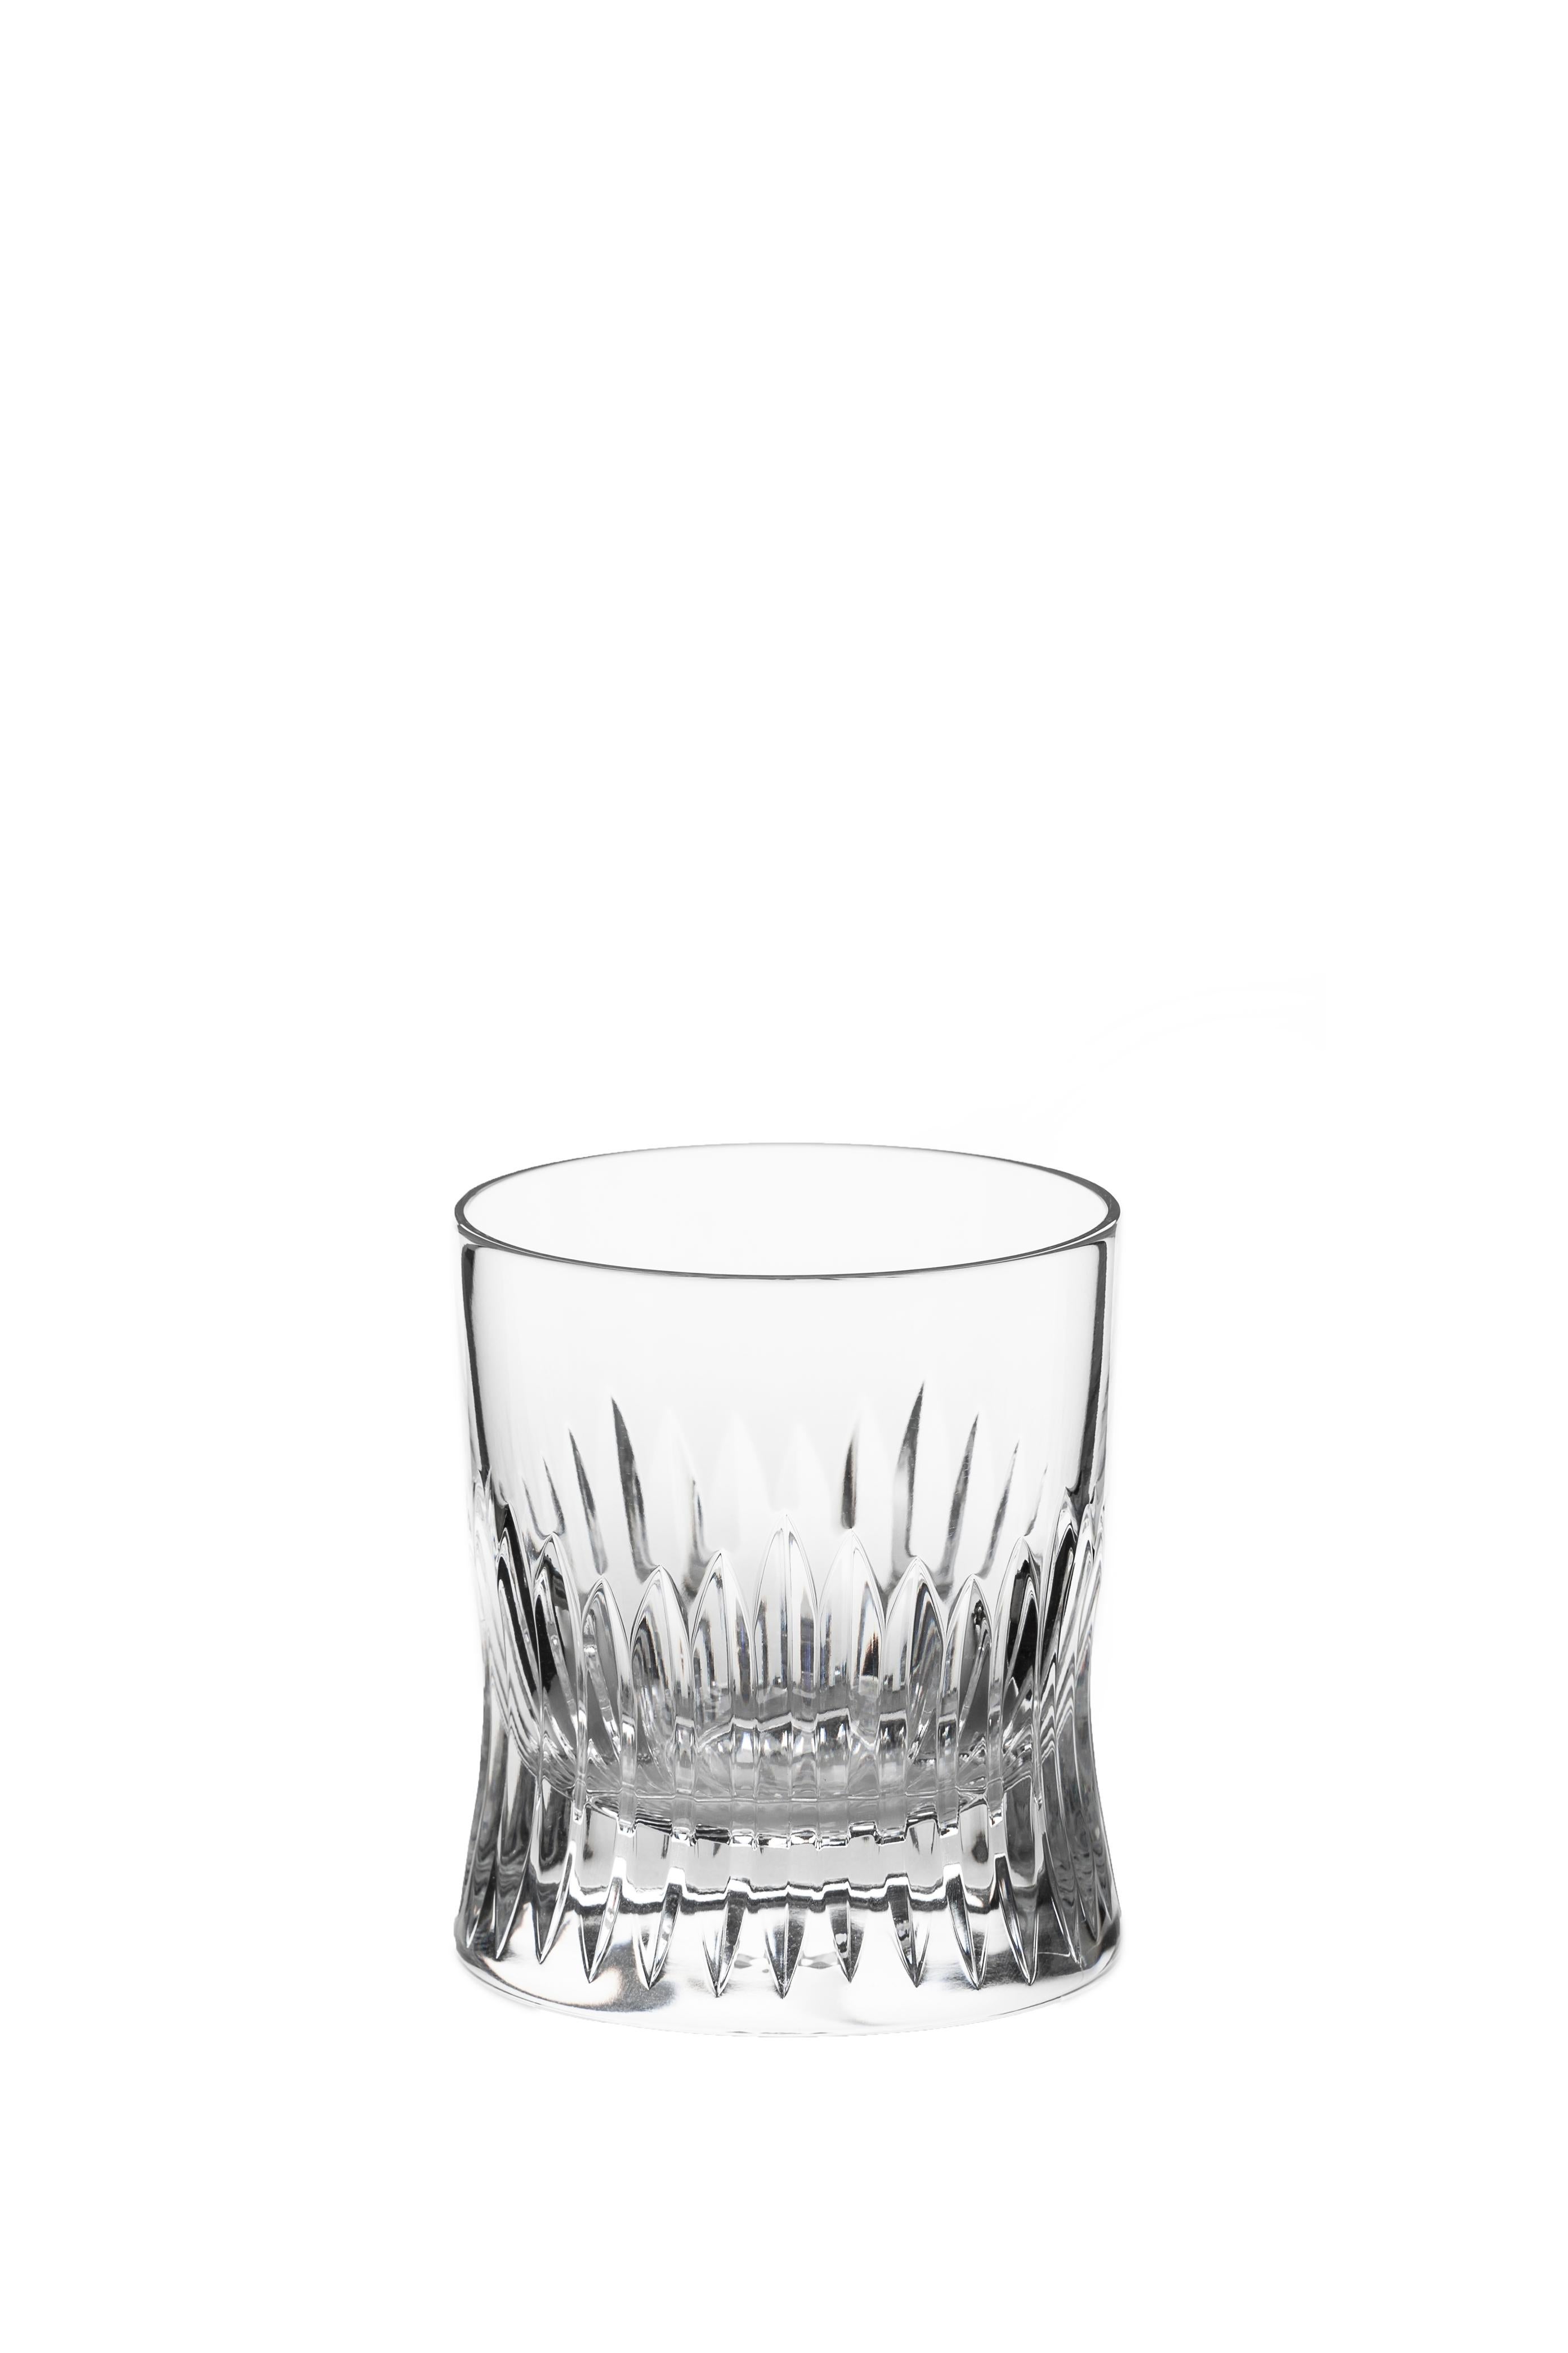 A Whiskey glass made by Hand (Part of the permanent collection at the Musee des Arts Decoratifs)

Glass designed by Martino Gamper for J. HILL’s Standard as part of our 'CUTTINGS' collection.

The collection: Cuttings
Cuttings is a